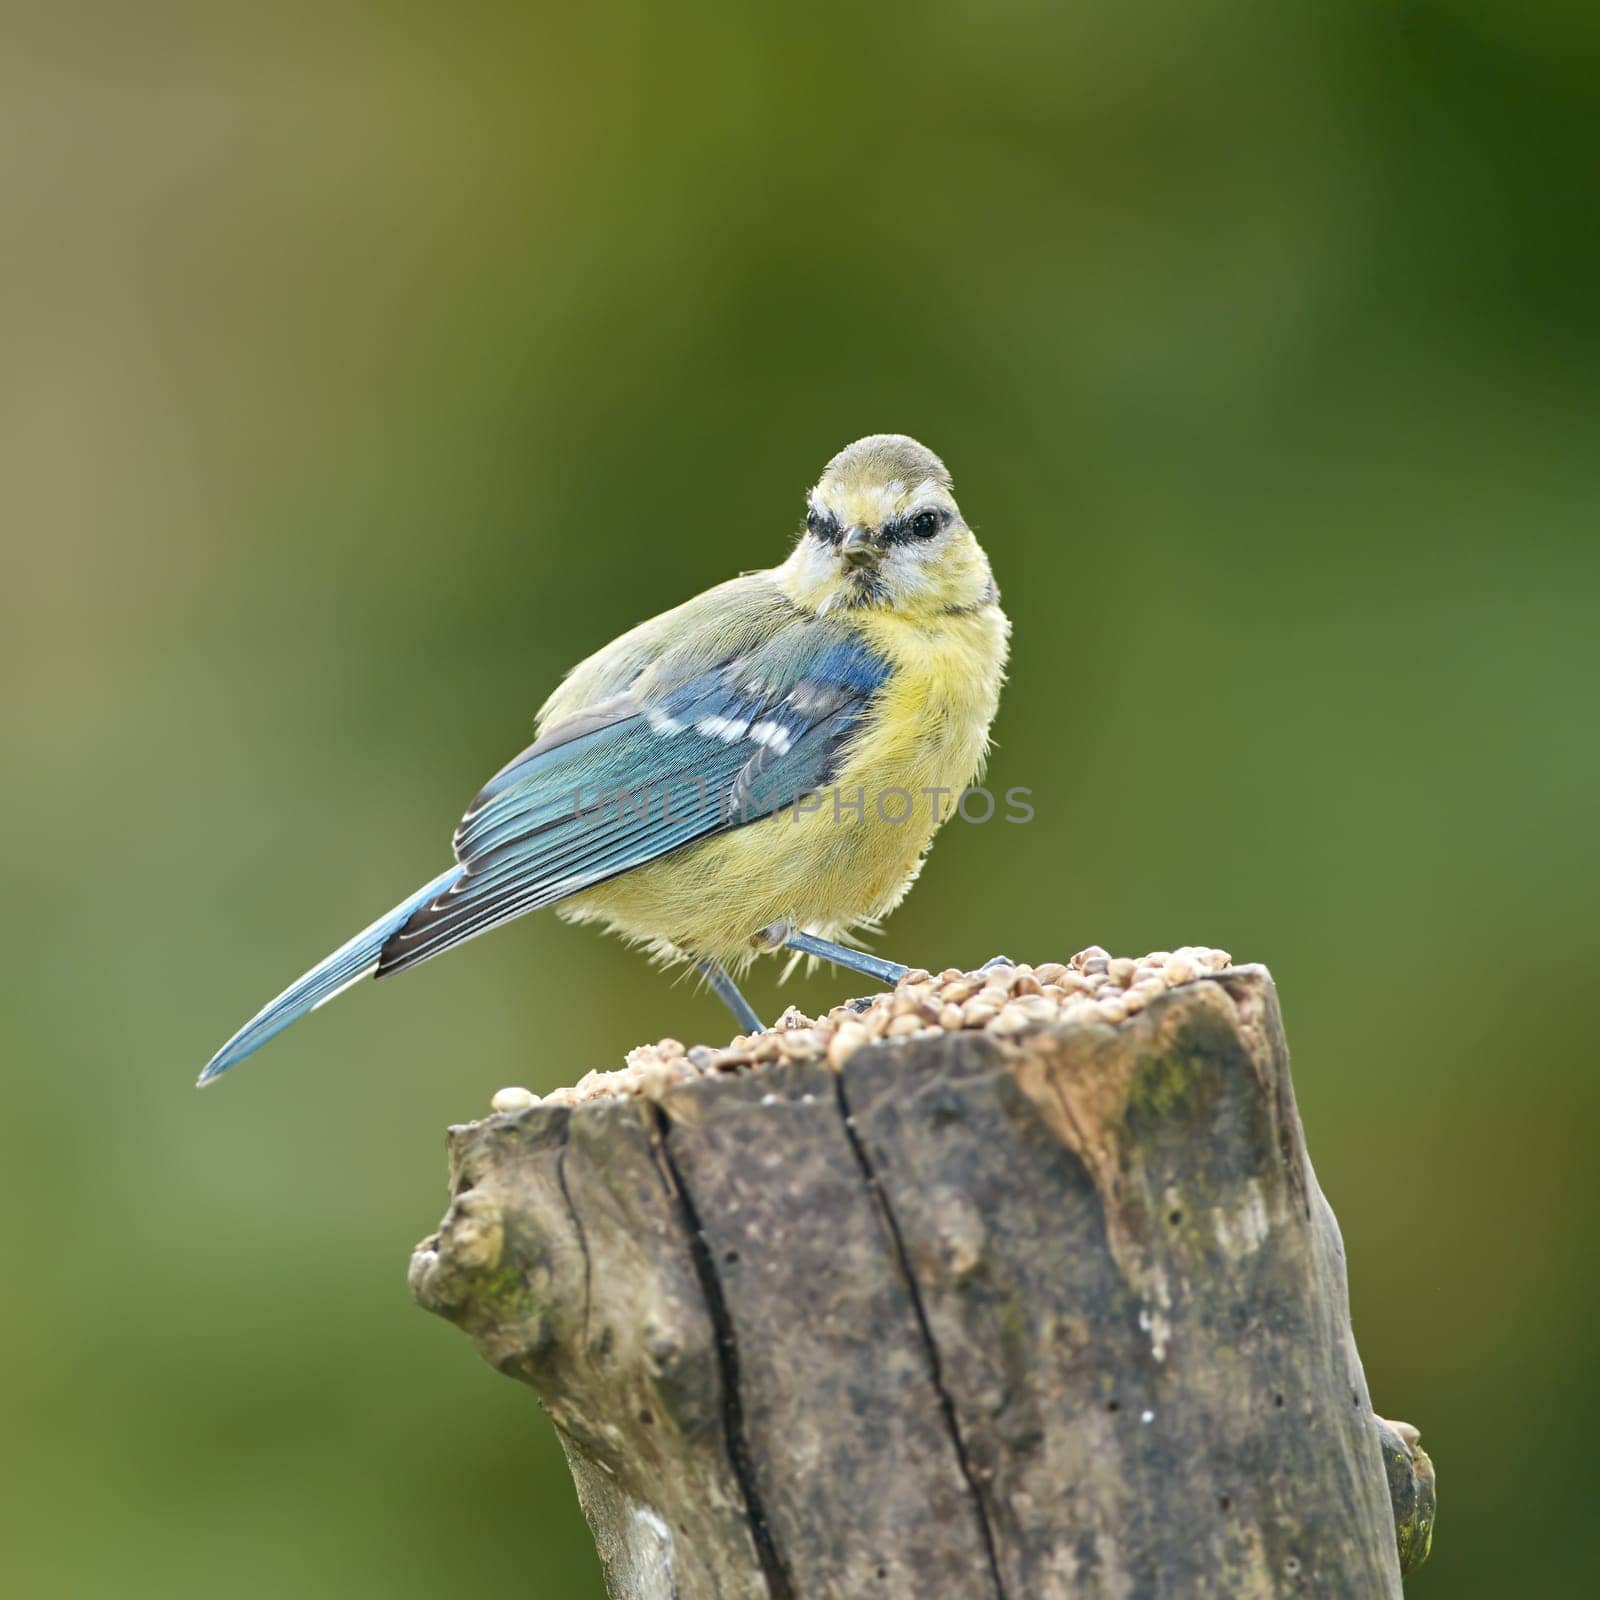 The Great Tit - Parus major. The Eurasian blue tit is a small passerine bird in the tit family Paridae. The bird is easily recognisable by its blue and yellow plumage